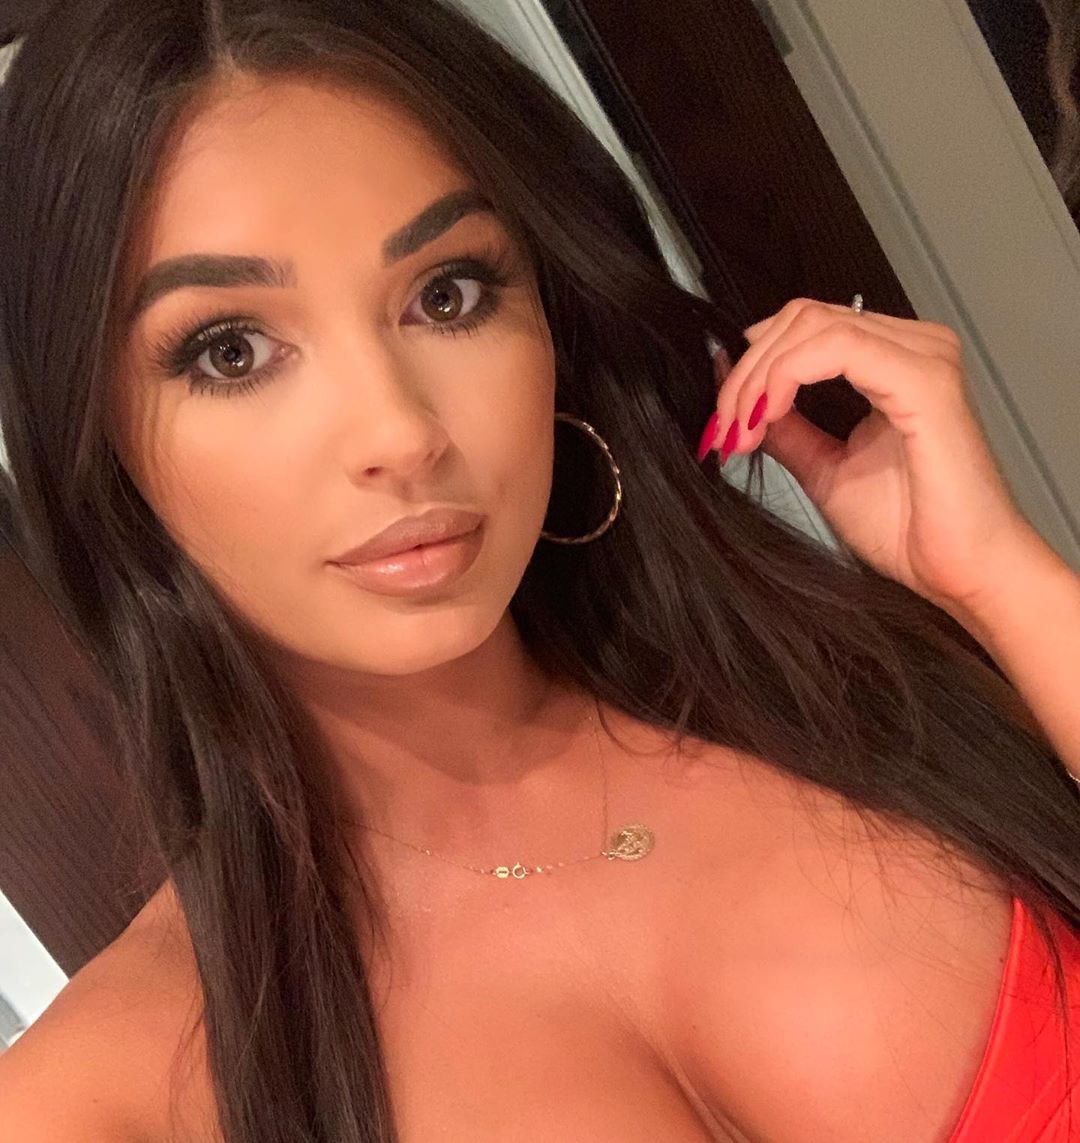 Instagram Jaw Dropping India Reynolds: Hot Girls Instagram,  instagram models,  India Reynolds,  top Instagram models,  Instagram India Reynolds,  Super Hot India Reynolds,  Pretty India Reynolds  